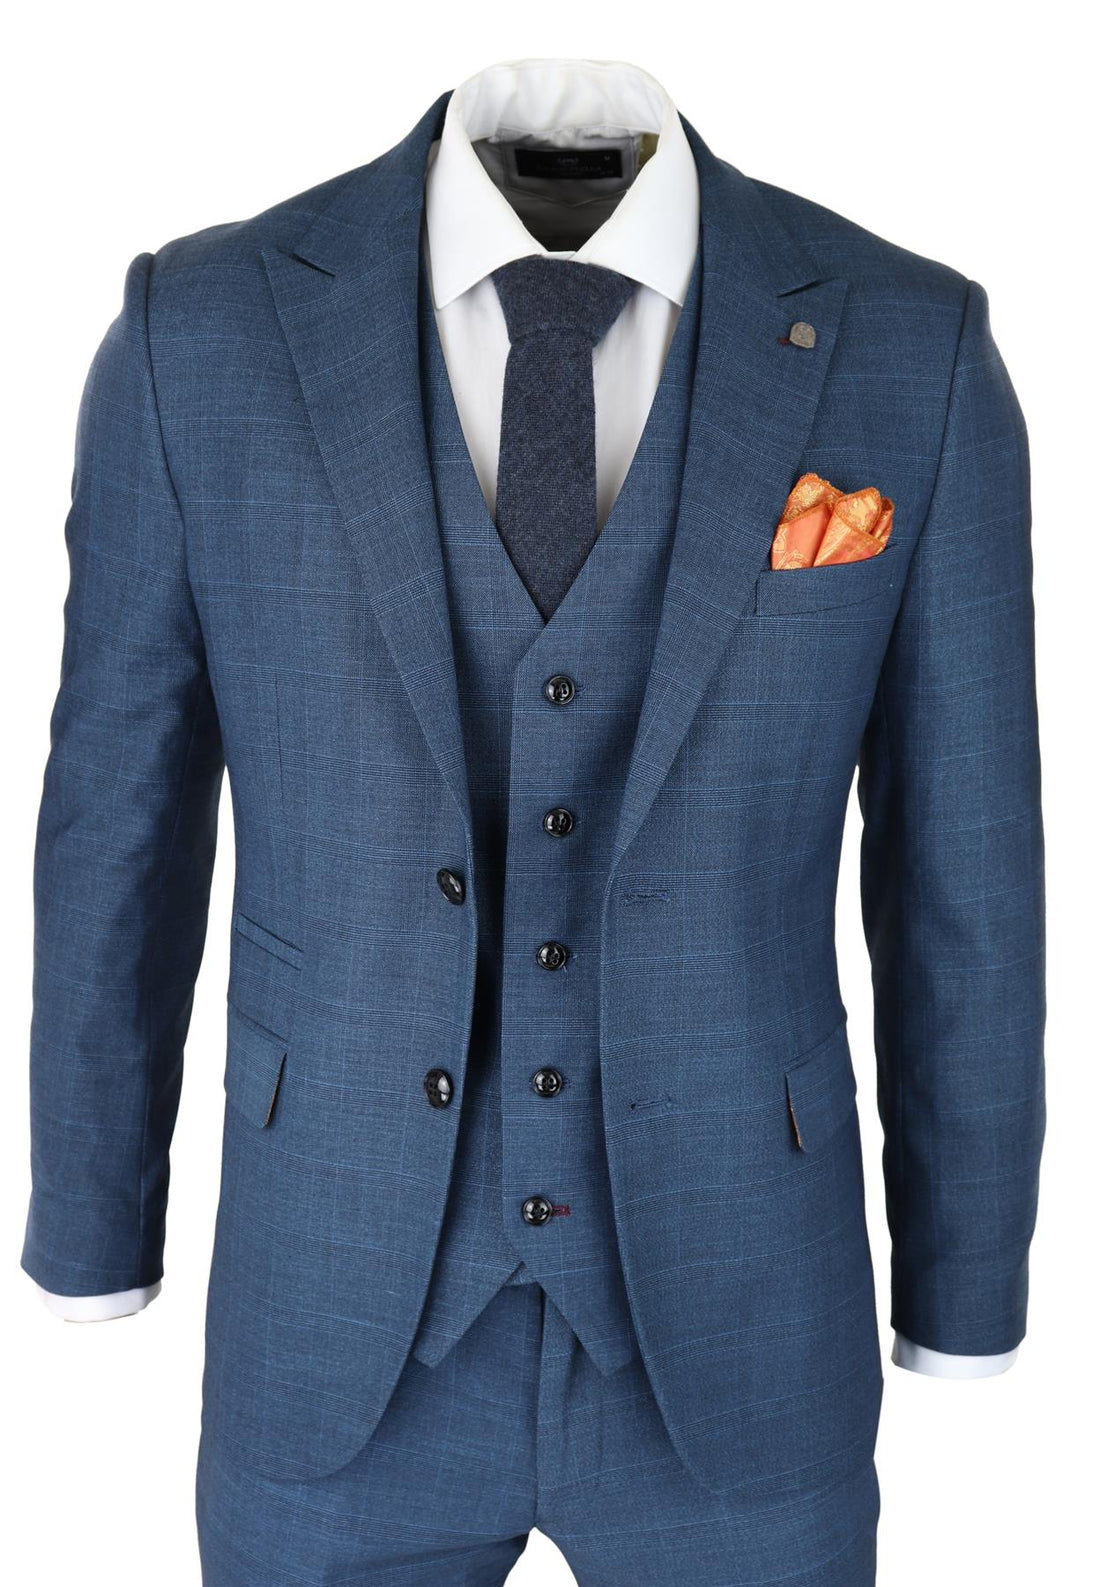 Mens 3 Piece Blue Suit Prince Of Wales Check Classic Light Tailored Fit Modern - Upperclass Fashions 